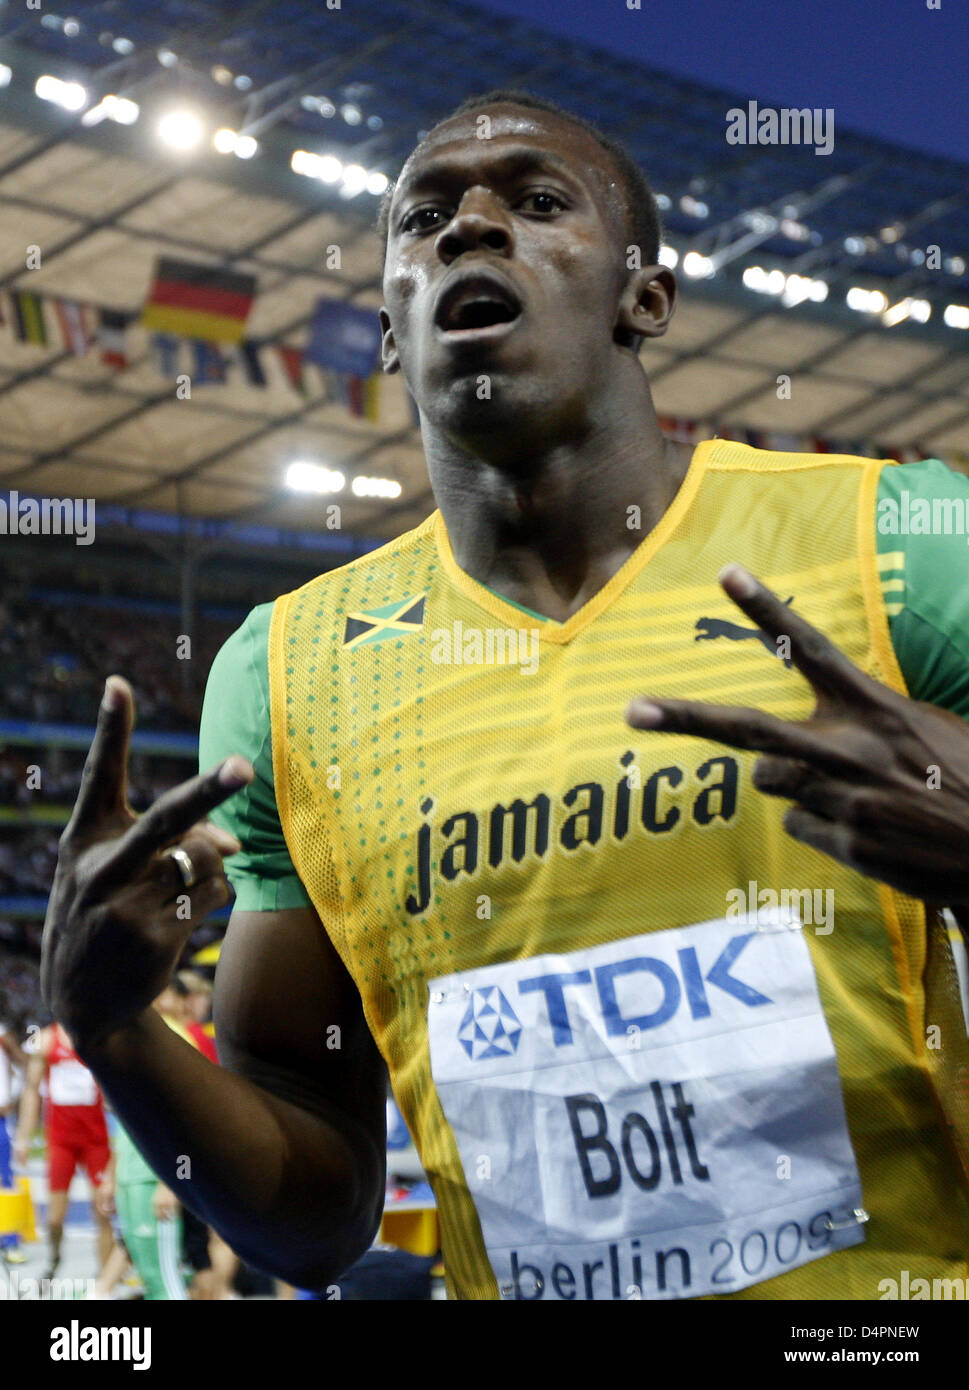 Jamaica?s Usain Bolt wins the 200m final at the 12th IAAF World Championships in Athletics Berlin 2009 in Berlin, Germany, 20 August 2009. Photo:  Kay Nietfeld Stock Photo